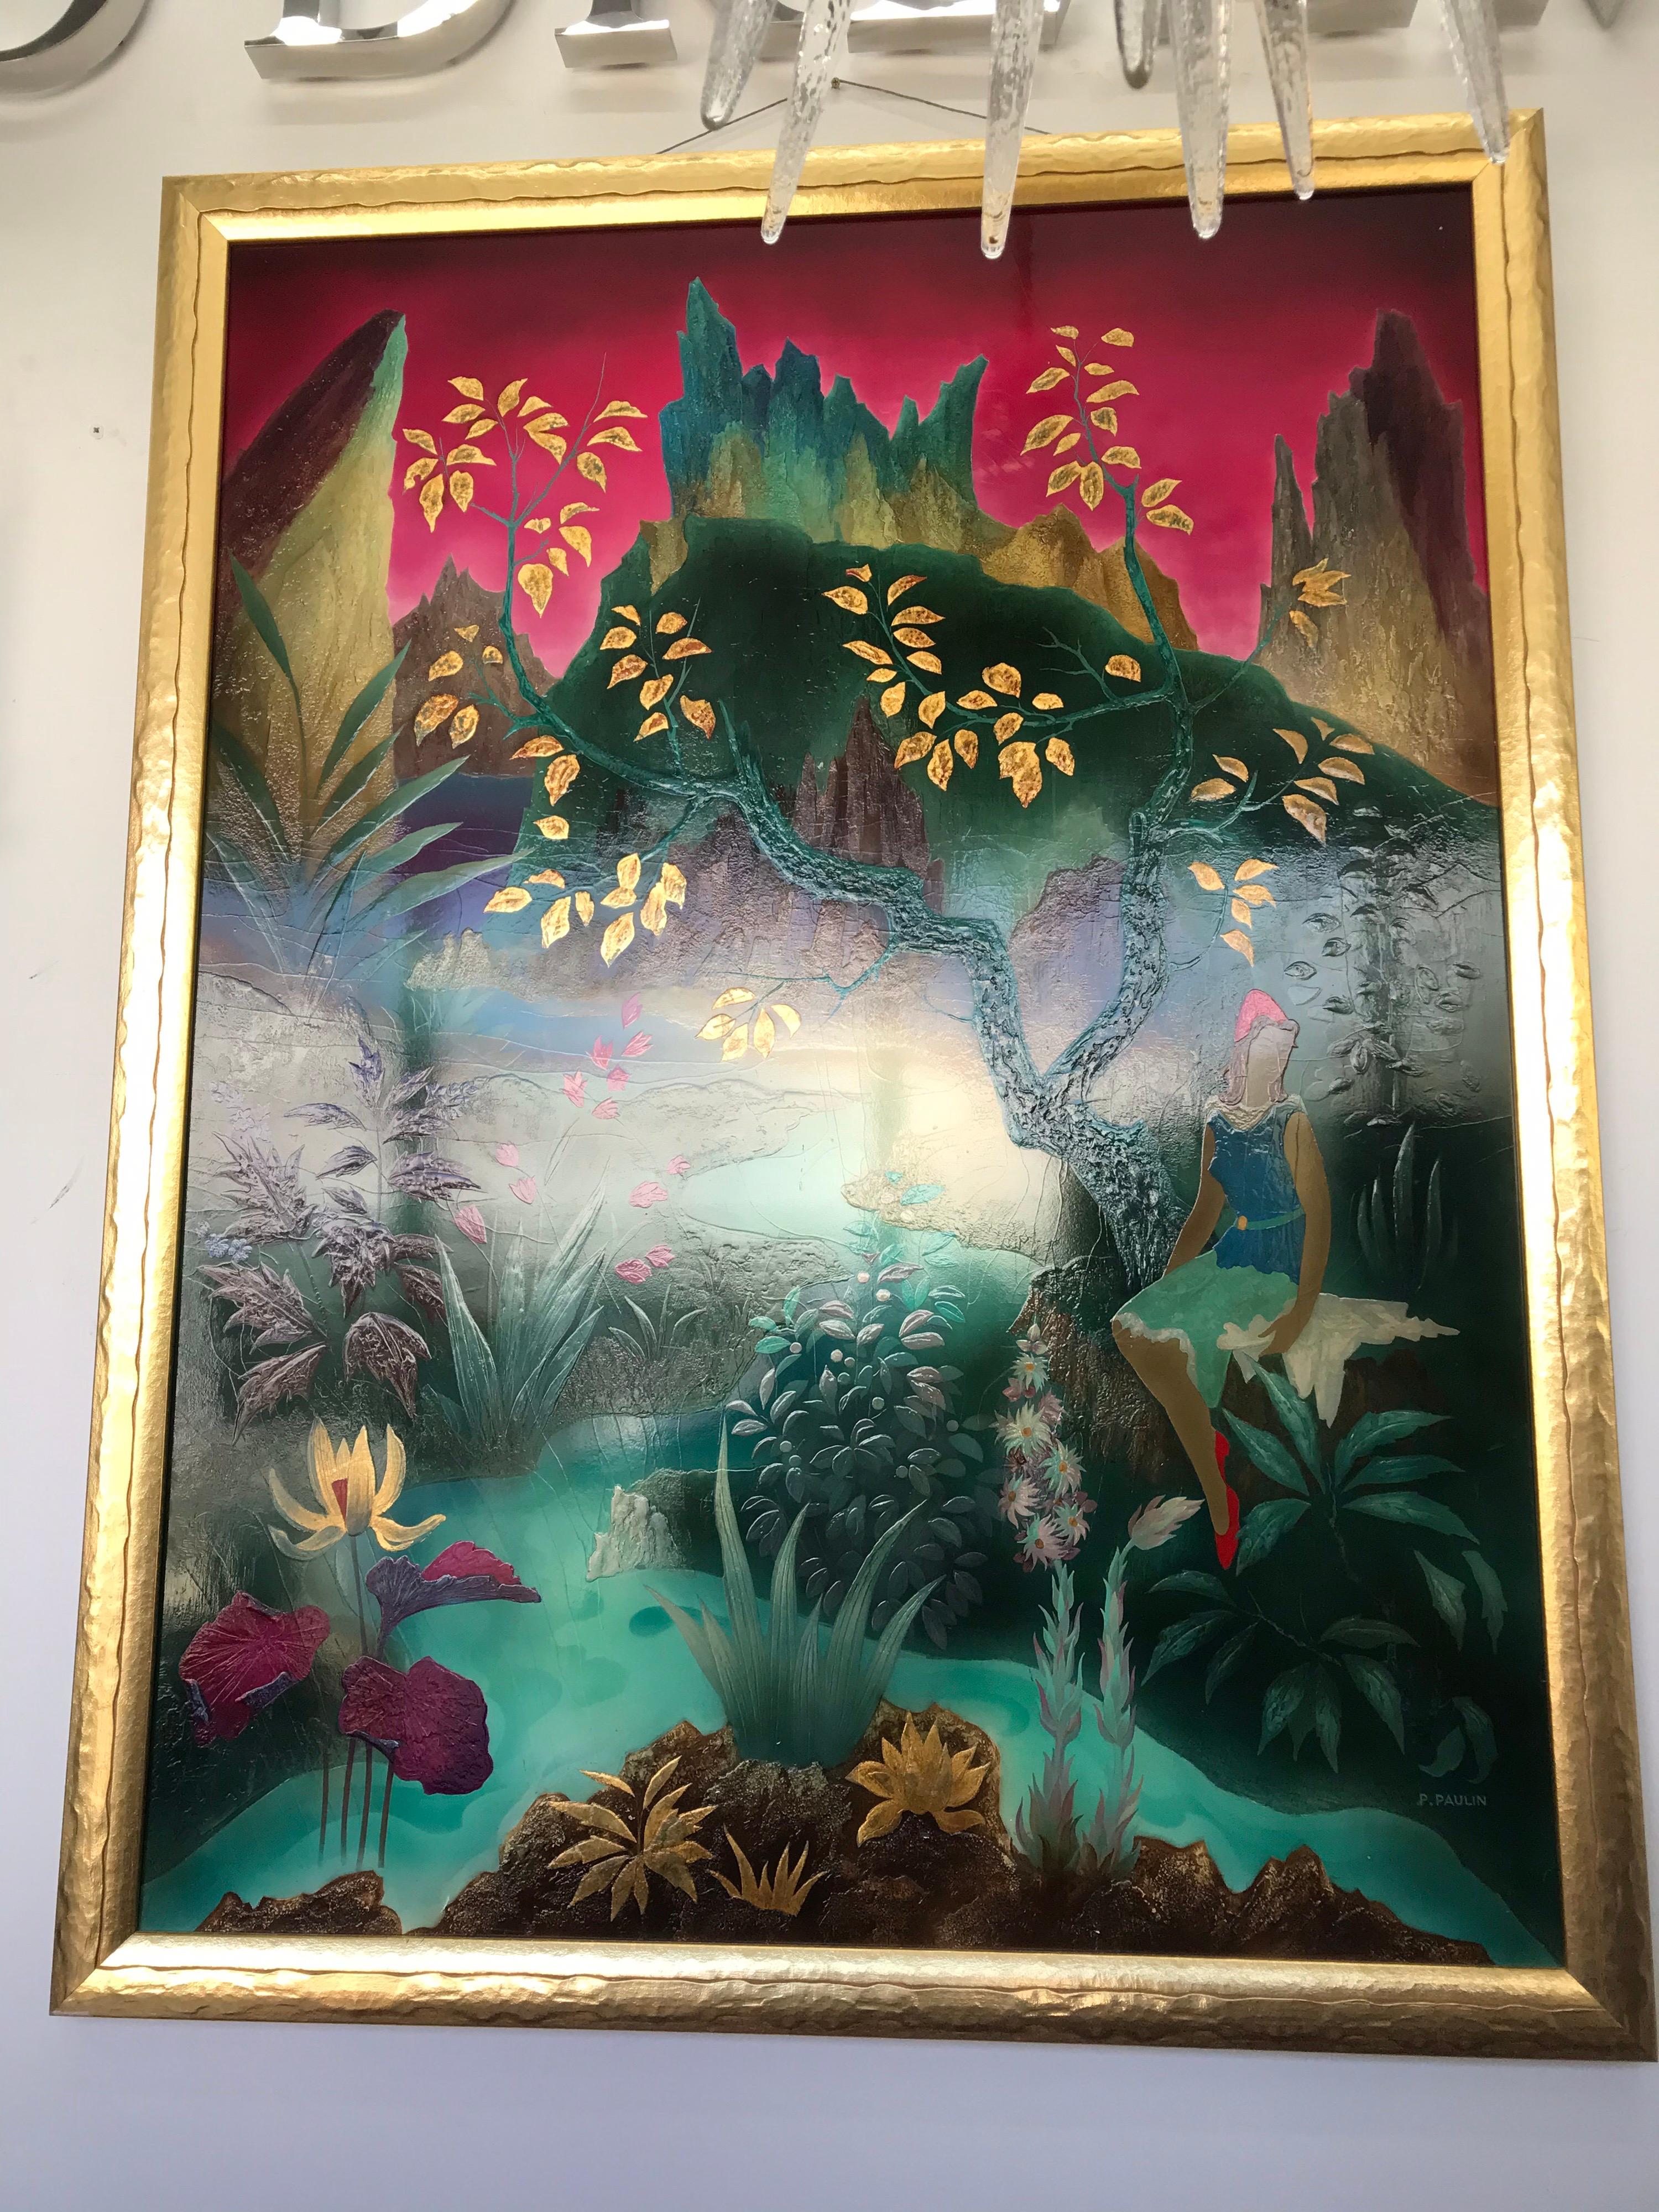 Imaginary landscape and a girl, lacquer by Pierre Paulin (1907-2007)
Lacquer painting with gold leaf, by Pierre Paulin representing an imaginary landscape inspired by Asian
The important digital flower and the graphic vegetation around the water